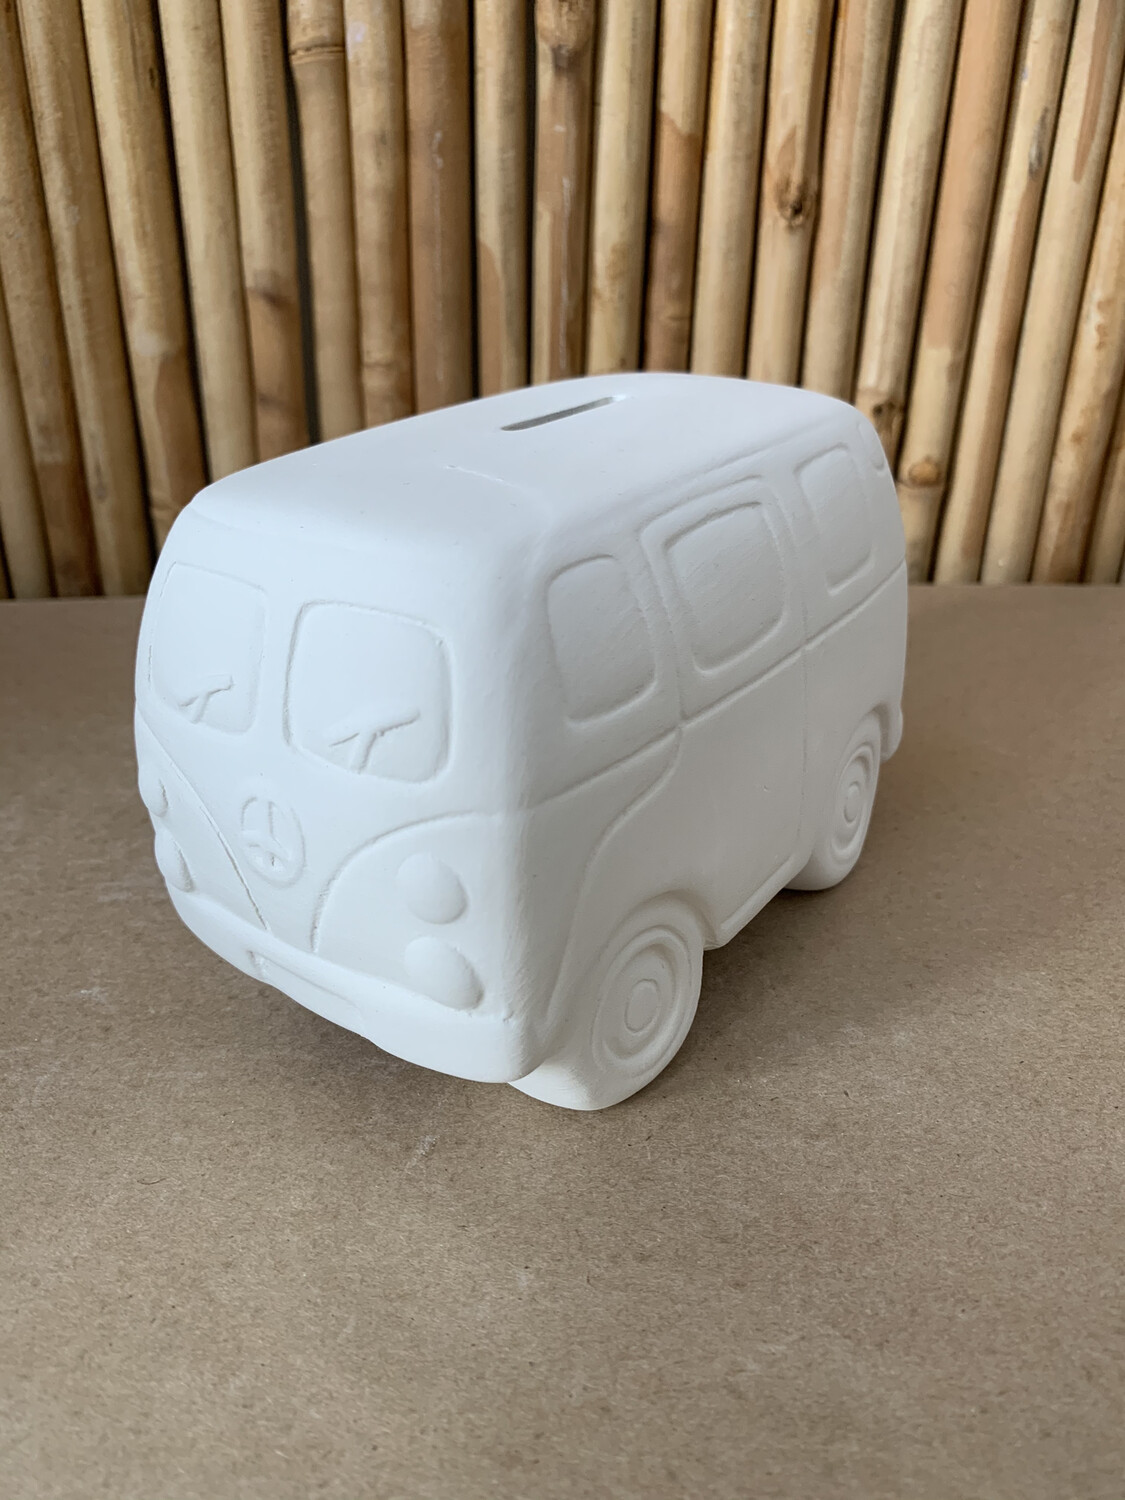 Paint Your Own Pottery - Ceramic
Hippie Van Bank Painting Kit